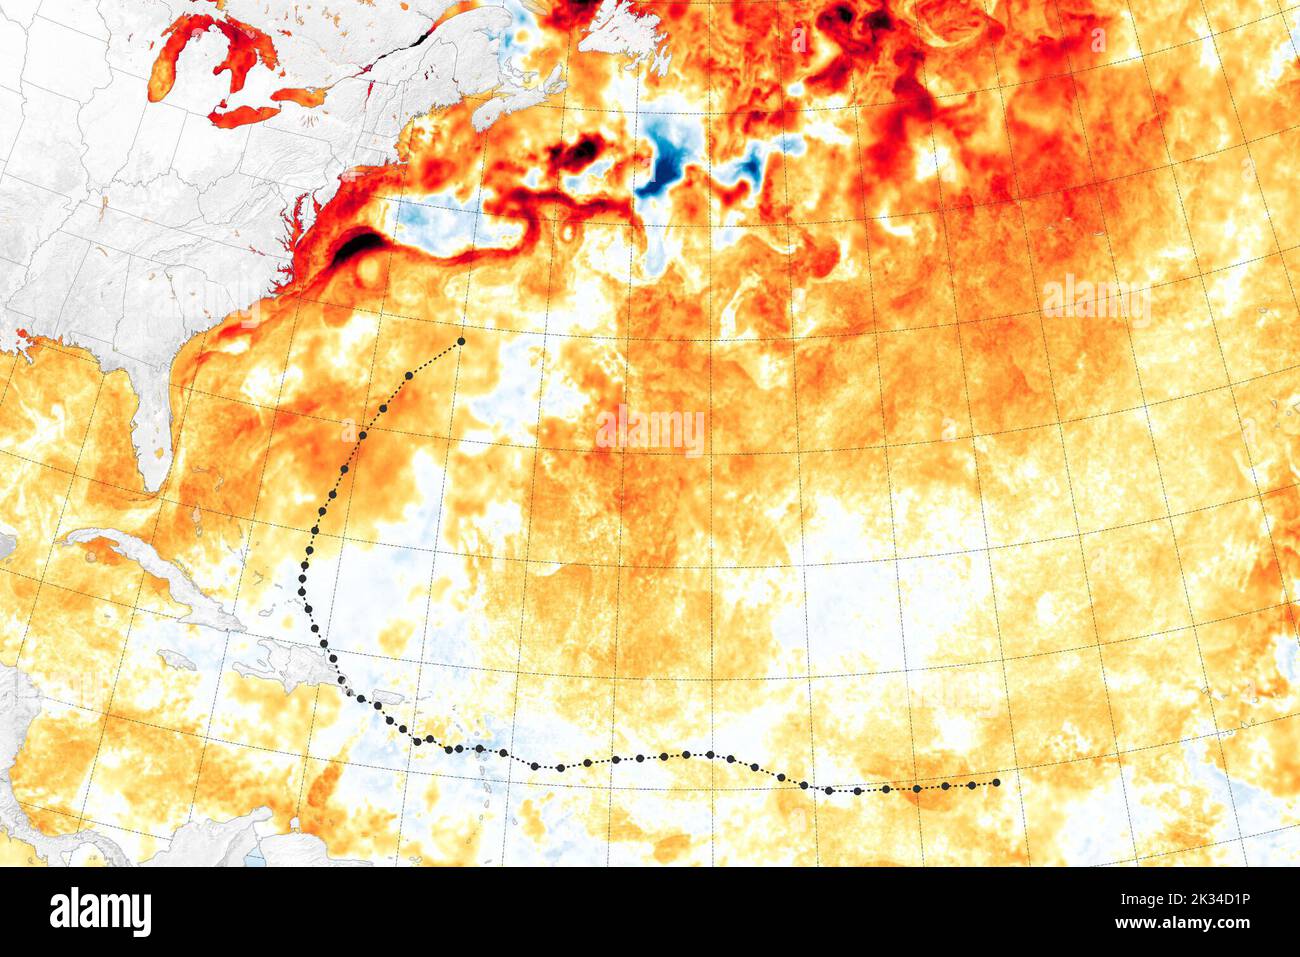 September 22, 2022: Atlantic Ocean: While traveling north, Hurricane Fiona passed over waters that were significantly warmer than normal, thereby providing fuel to sustain and even intensify the storm system. In fact, the storm crossed Puerto Rico as a category 1 hurricane; within days, it intensified to category 3 and 4 strength as it moved well beyond tropical latitudes. Credit: NASA Earth/ZUMA Press Wire Service/ZUMAPRESS.com/Alamy Live News Stock Photo